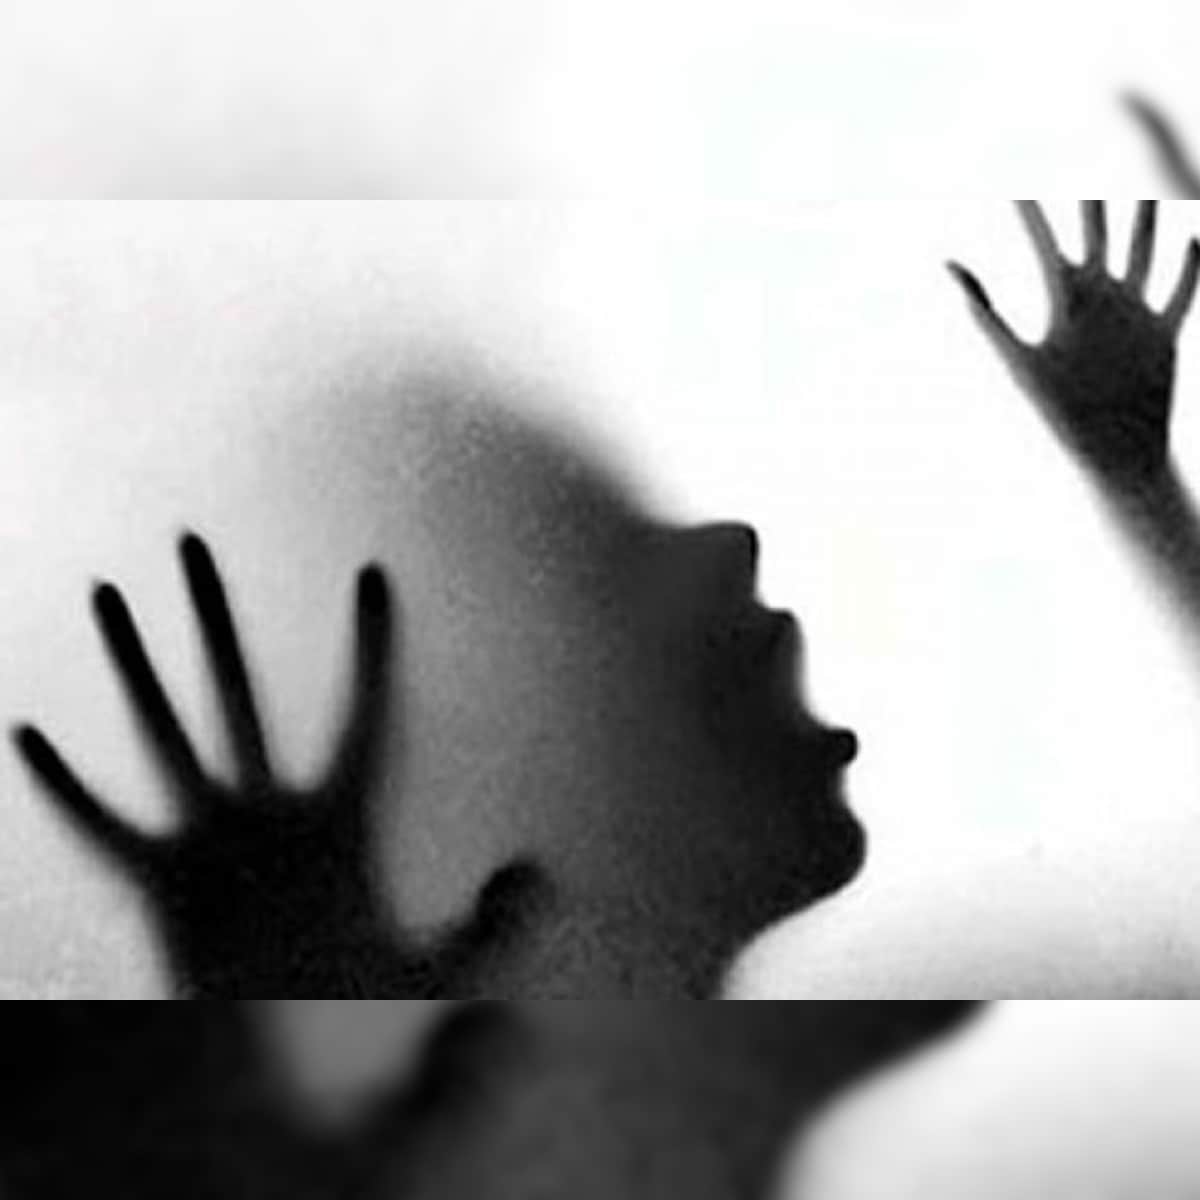 10-year-old Boy Injured After Minor Girl Forces Sex in Kanpur